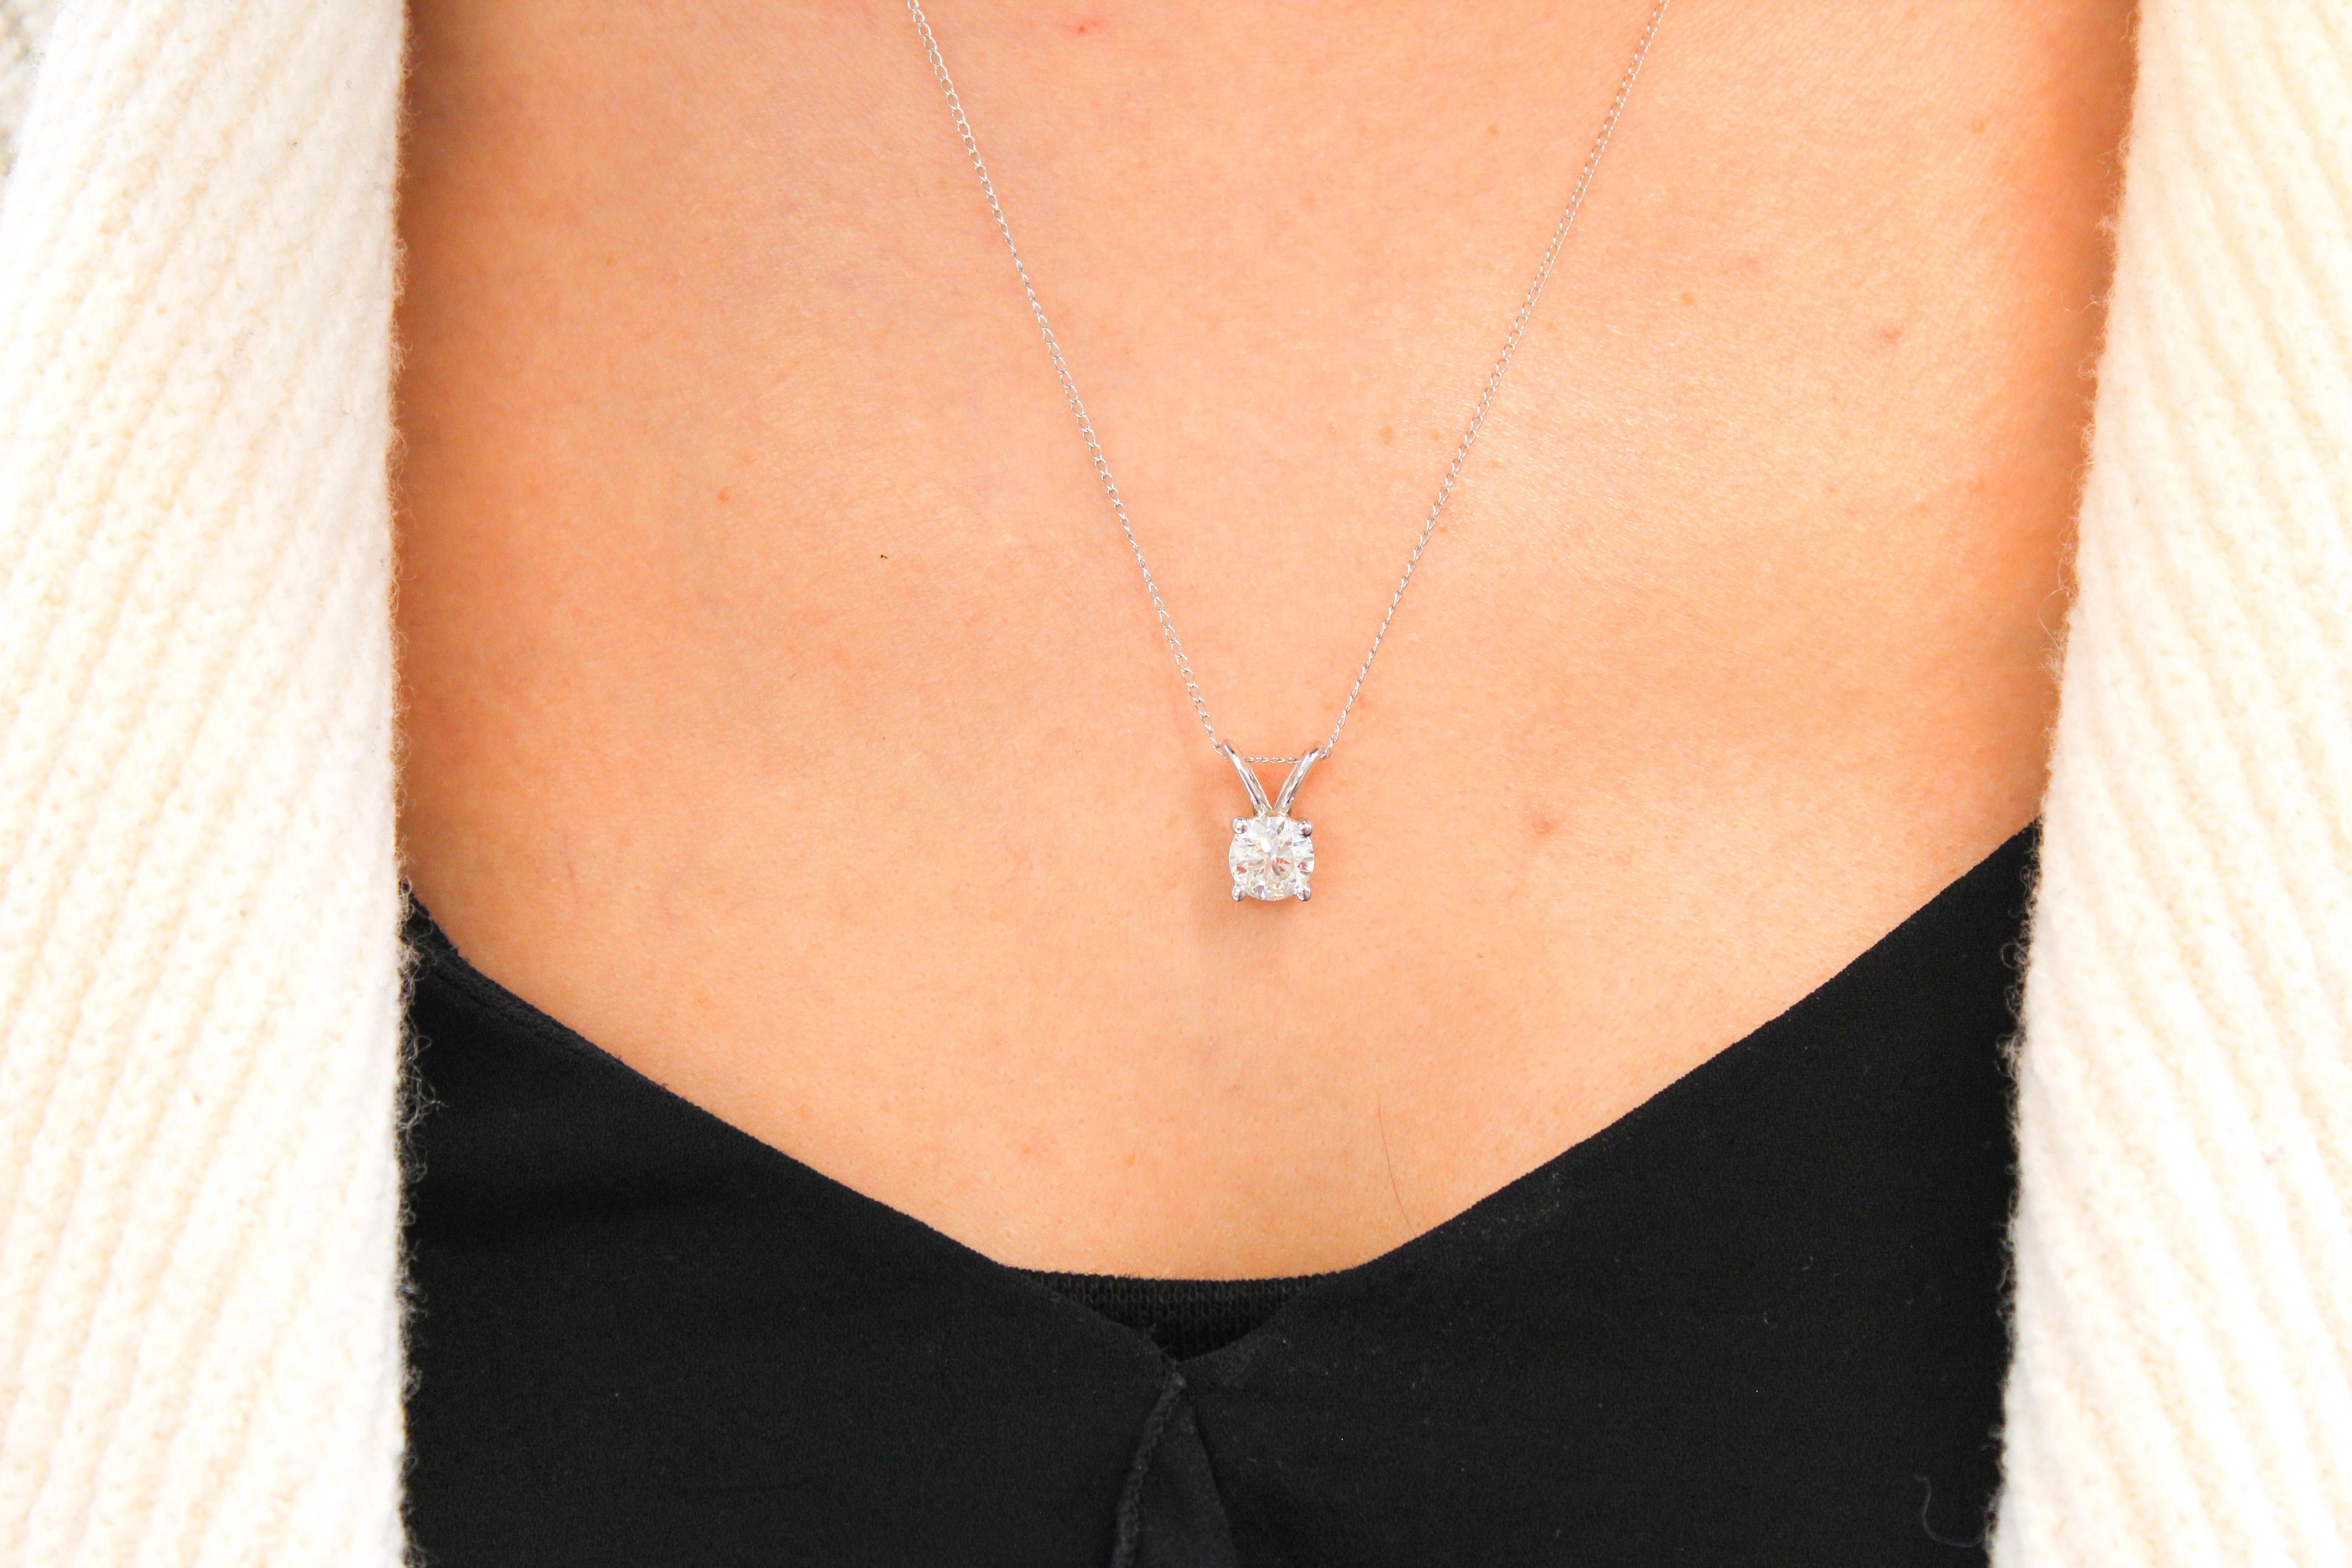 This impressive diamond solitaire pendant is finely crafted in brightly polished 14 karat rose gold and features a round shaped 2.00 carat diamond that has I1 clarity, gracefully prong set on a shiny split bail. Ideal as an anniversary or birthday